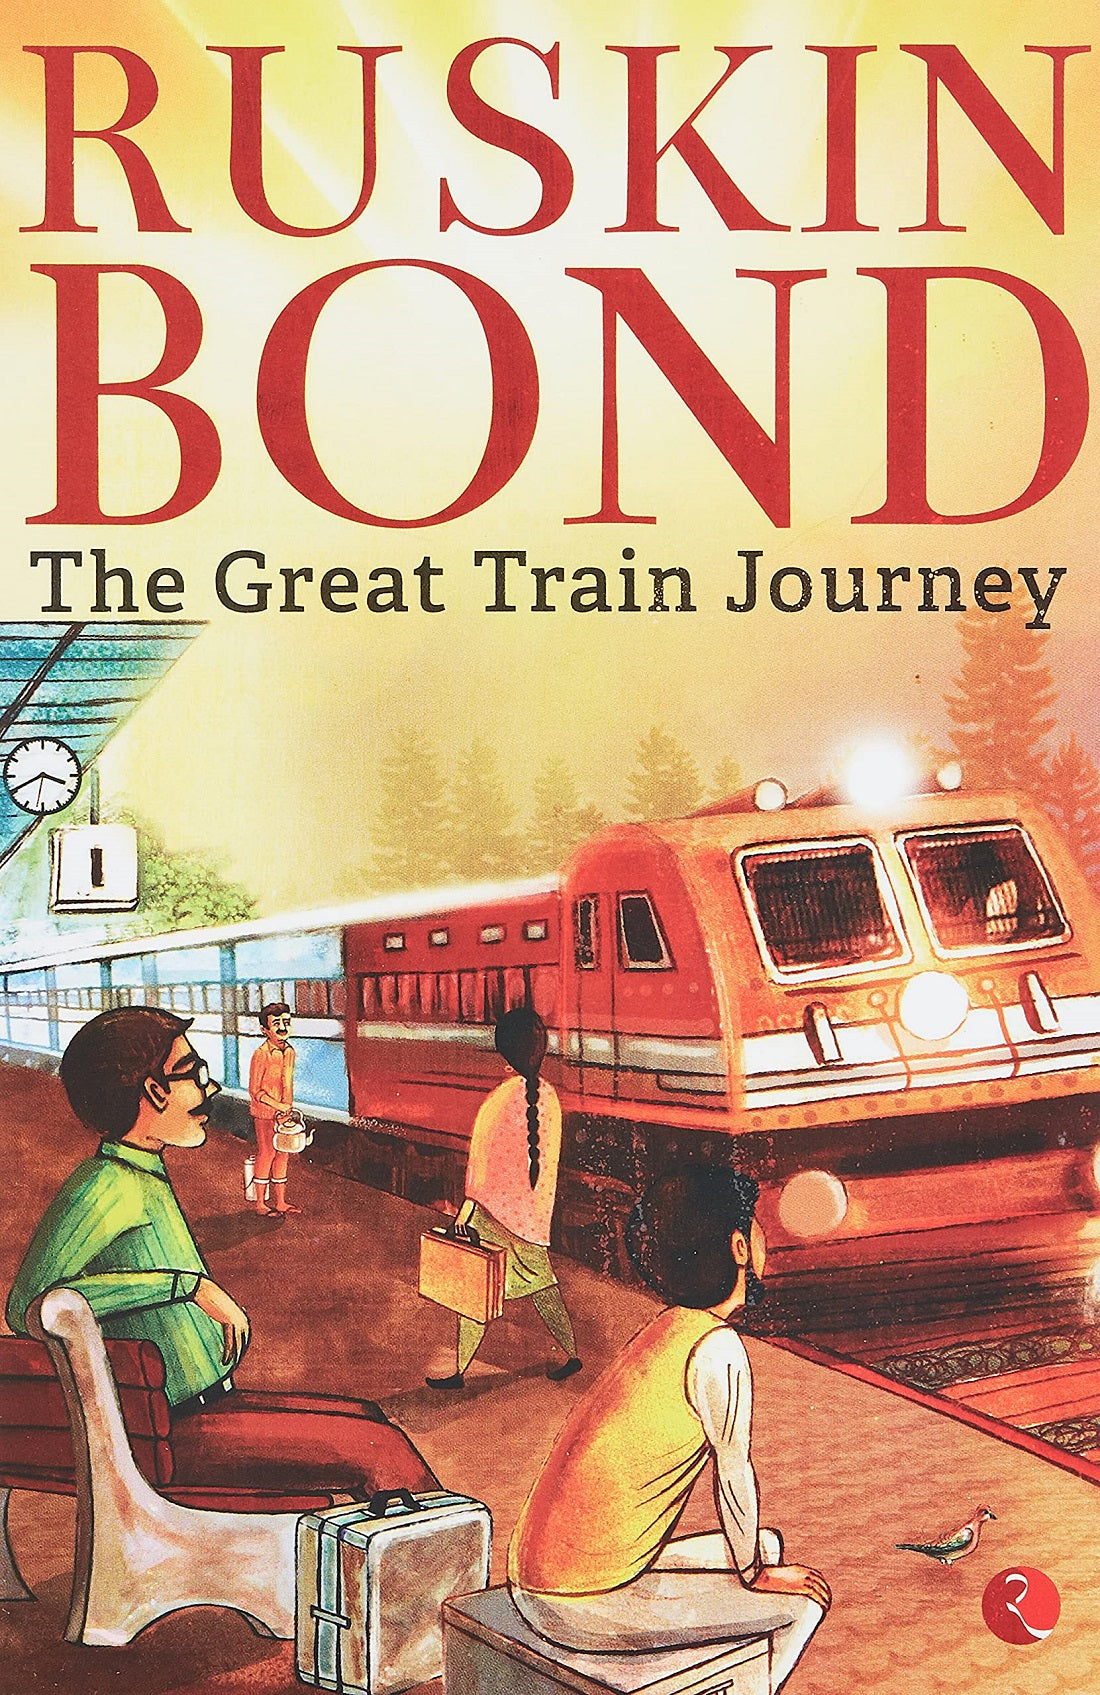 The Great Train Journey by Ruskin Bond